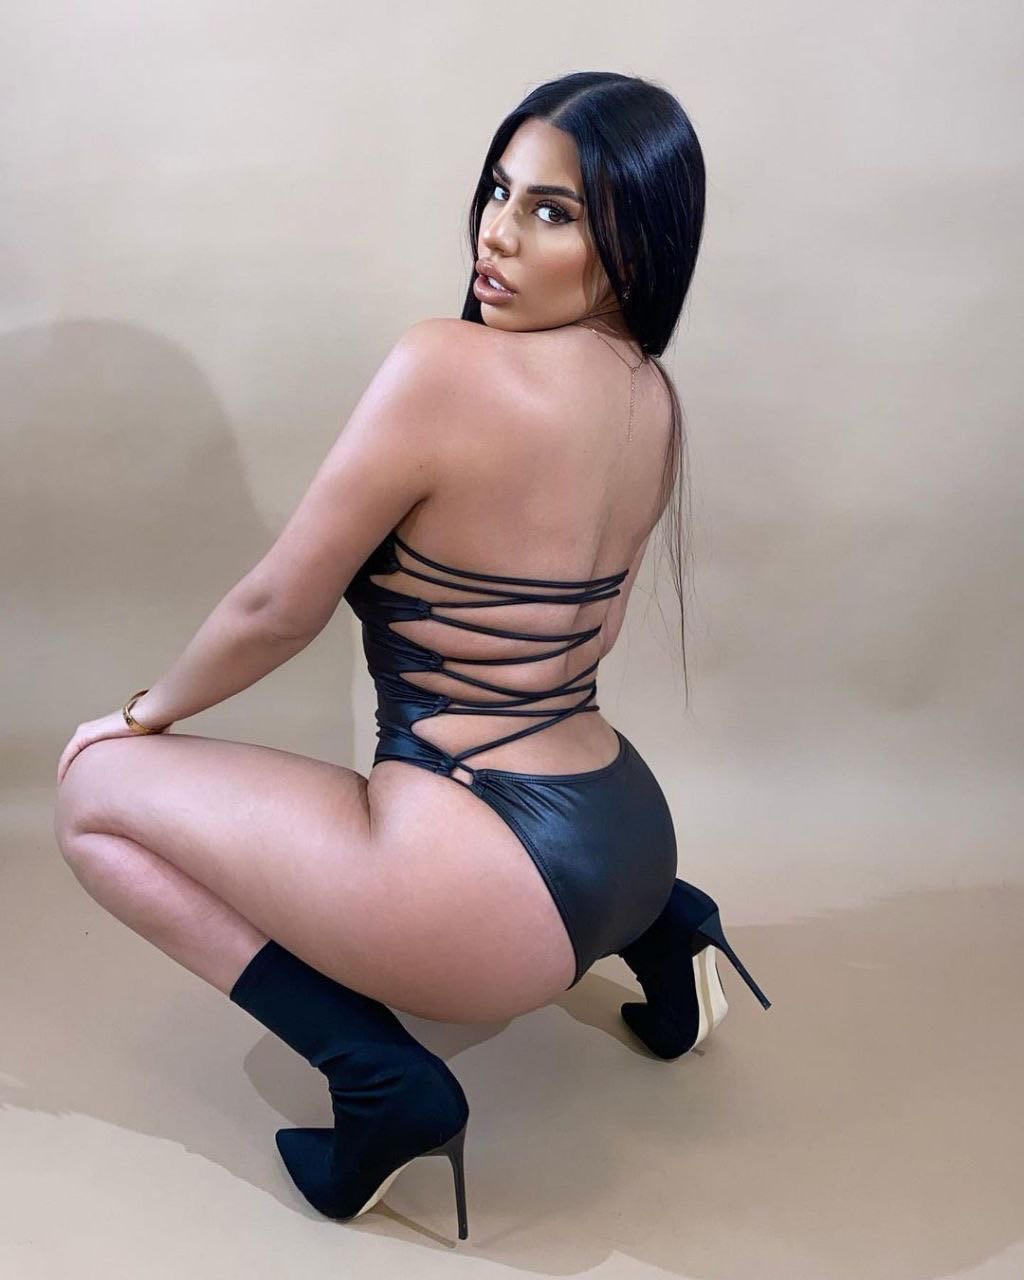 💫 NEW 💫 Young latina America Girl In Brampton 💫 AVAILABLE !!!